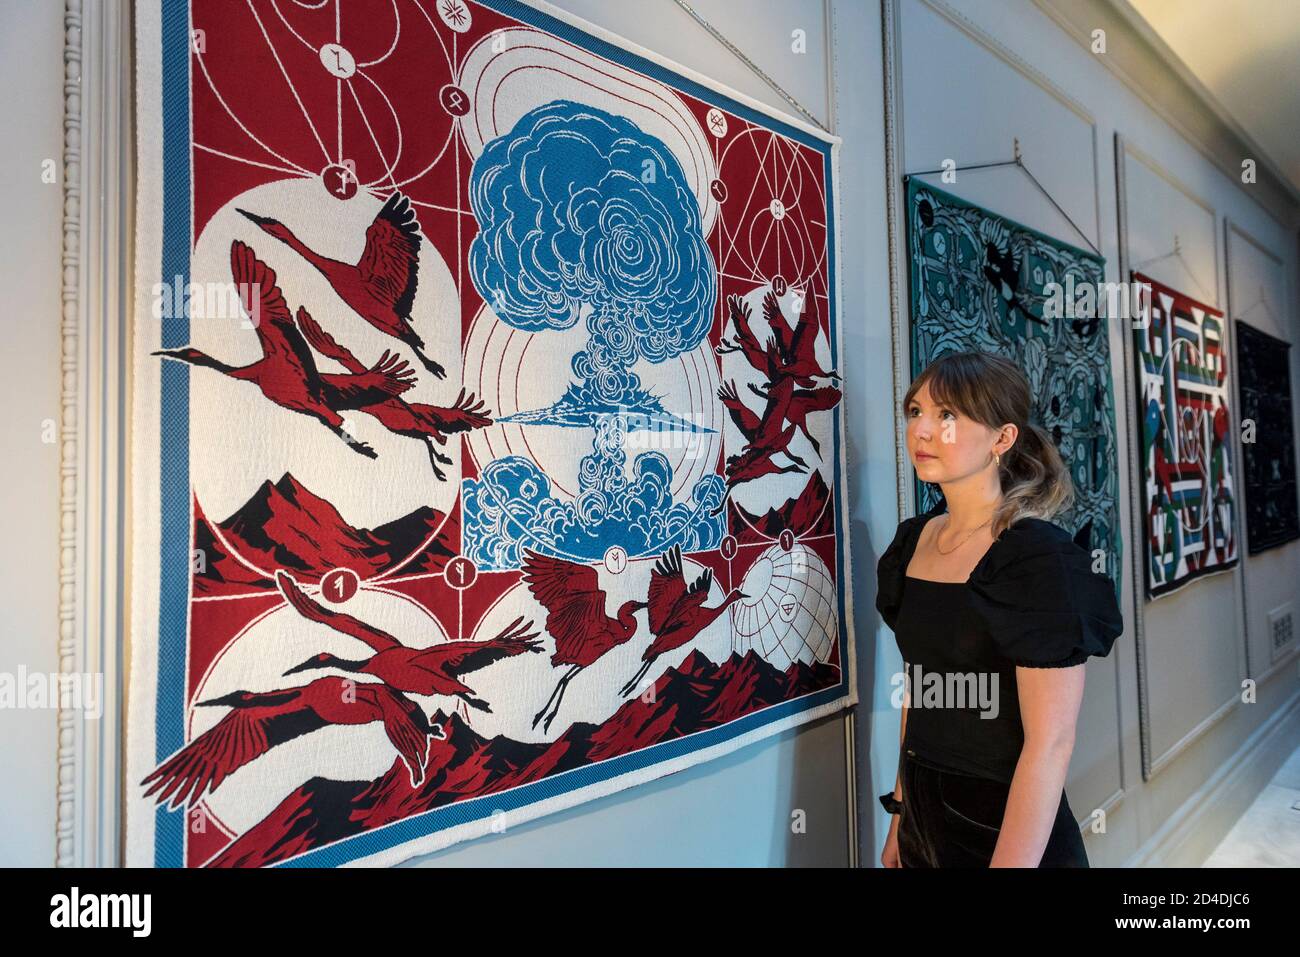 London, UK. 9 October 2020. A staff member views a series of silk hangings  by Berke Yazicioglu, illustrating Stravinsky's The Rite of Spring, at the  launch of The House of Bandits in